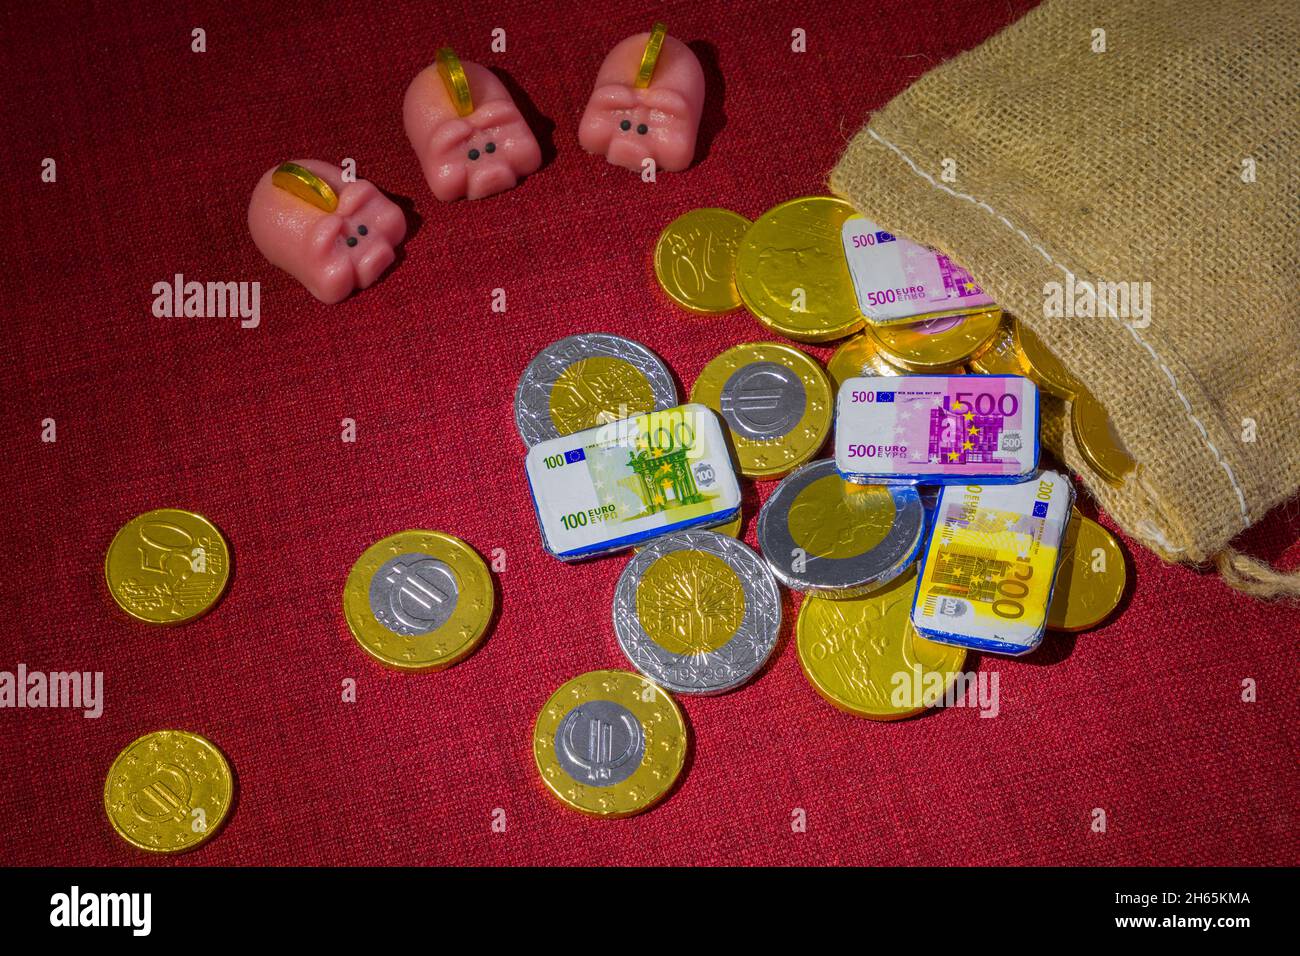 Chocolate coins scattered around, a sack and marzipan piggy banks. Concept for expensive holidays like Christmas and Sinterklaas Stock Photo